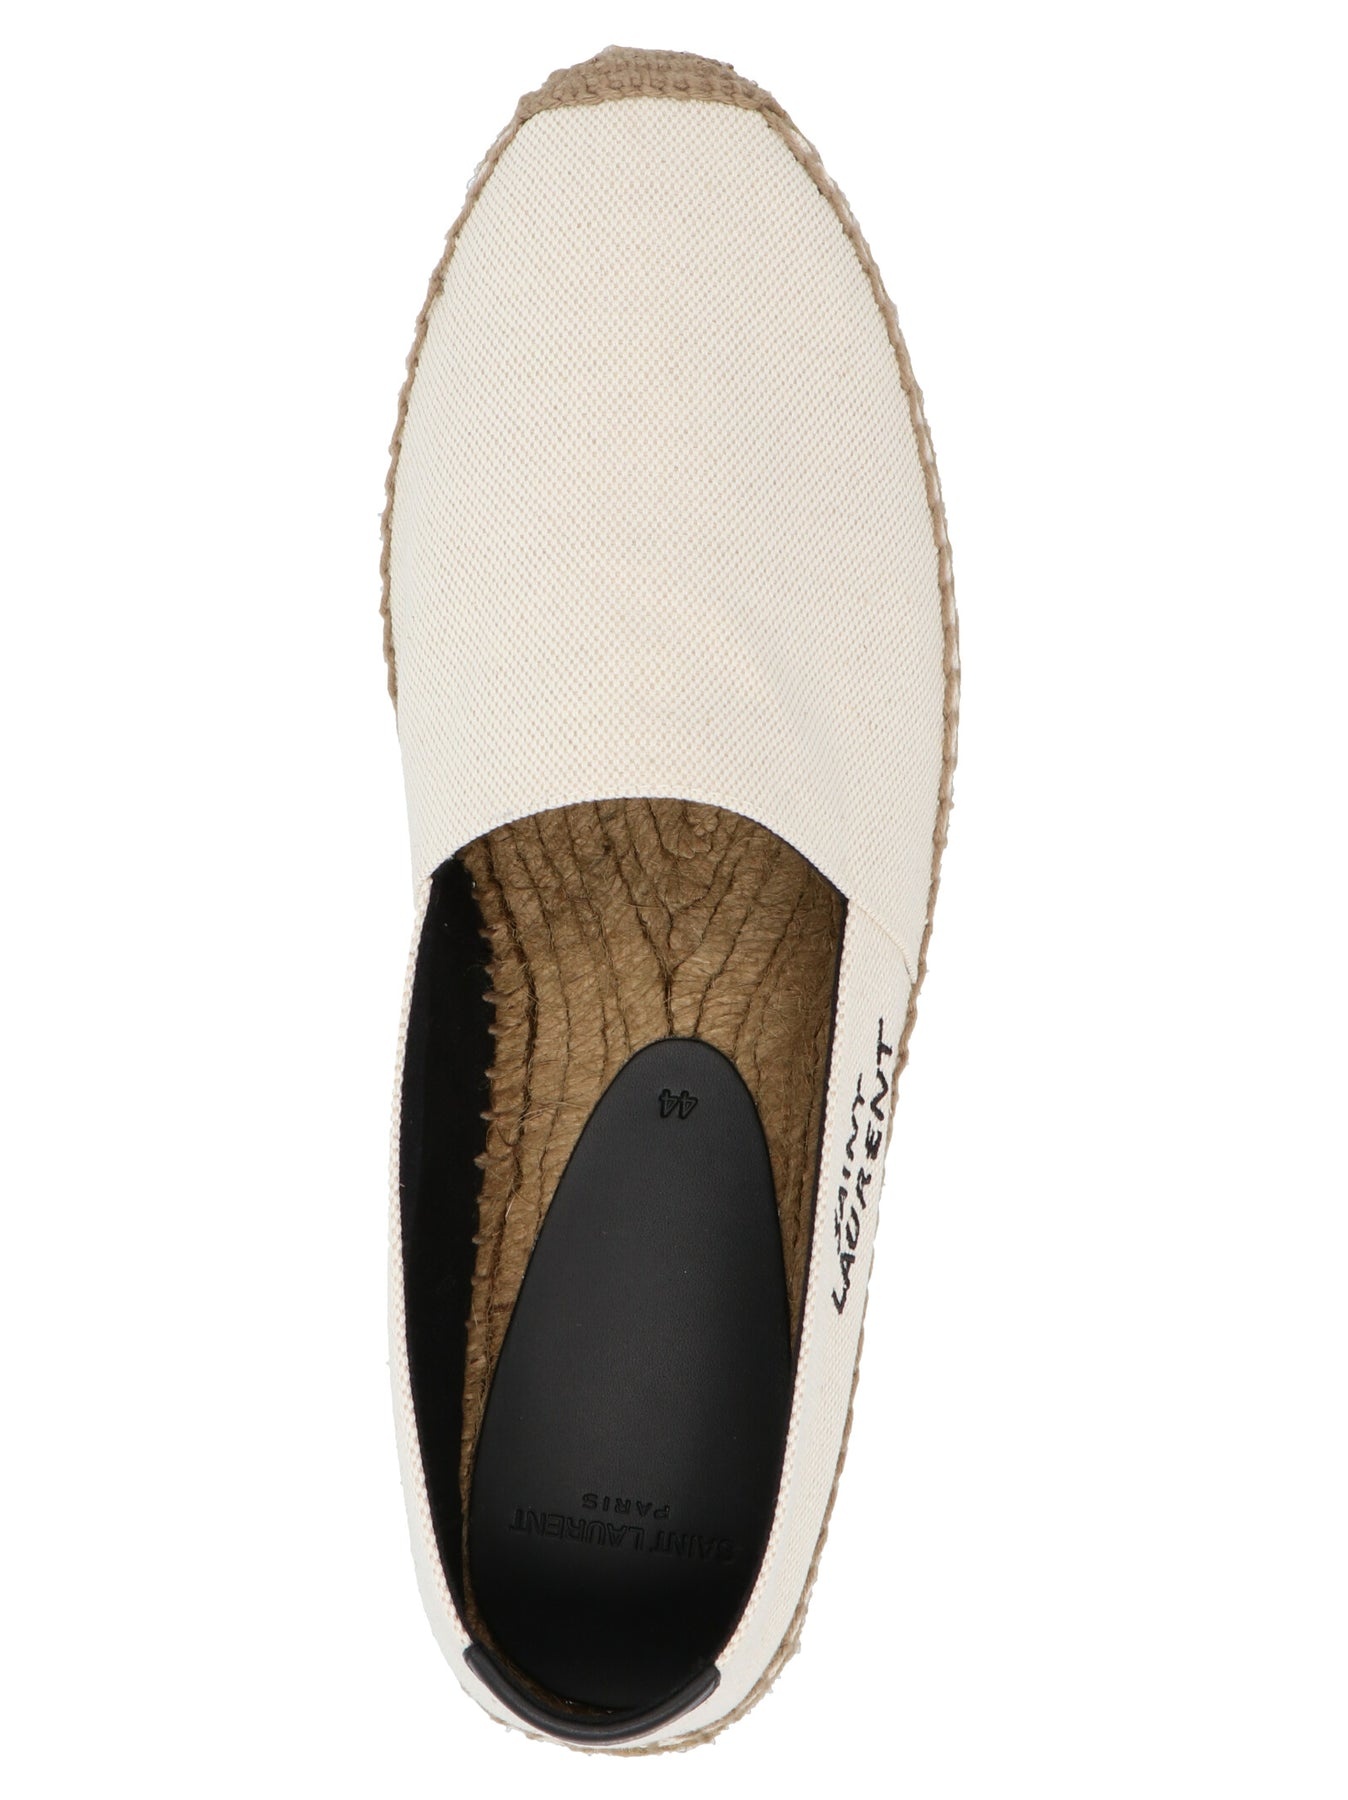 Logo Embroidery Espadrilles Flat Shoes Beige - 3